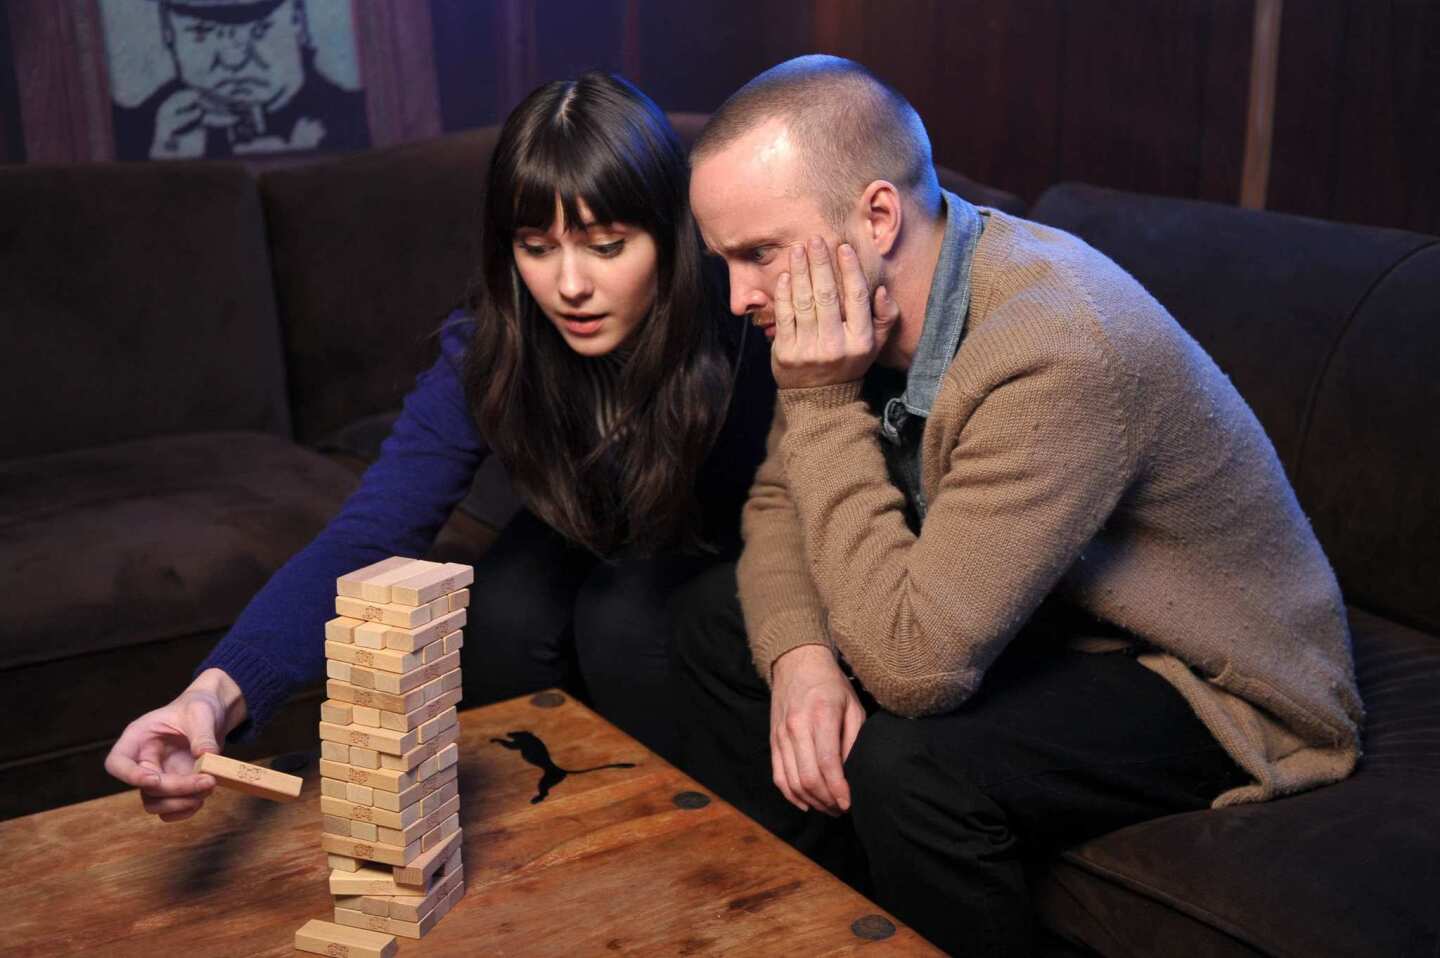 "Smashed" stars Mary Elizabeth Winstead and Aaron Paul, who also stars in the TV series "Breaking Bad," play games at the Puma Social Lounge.